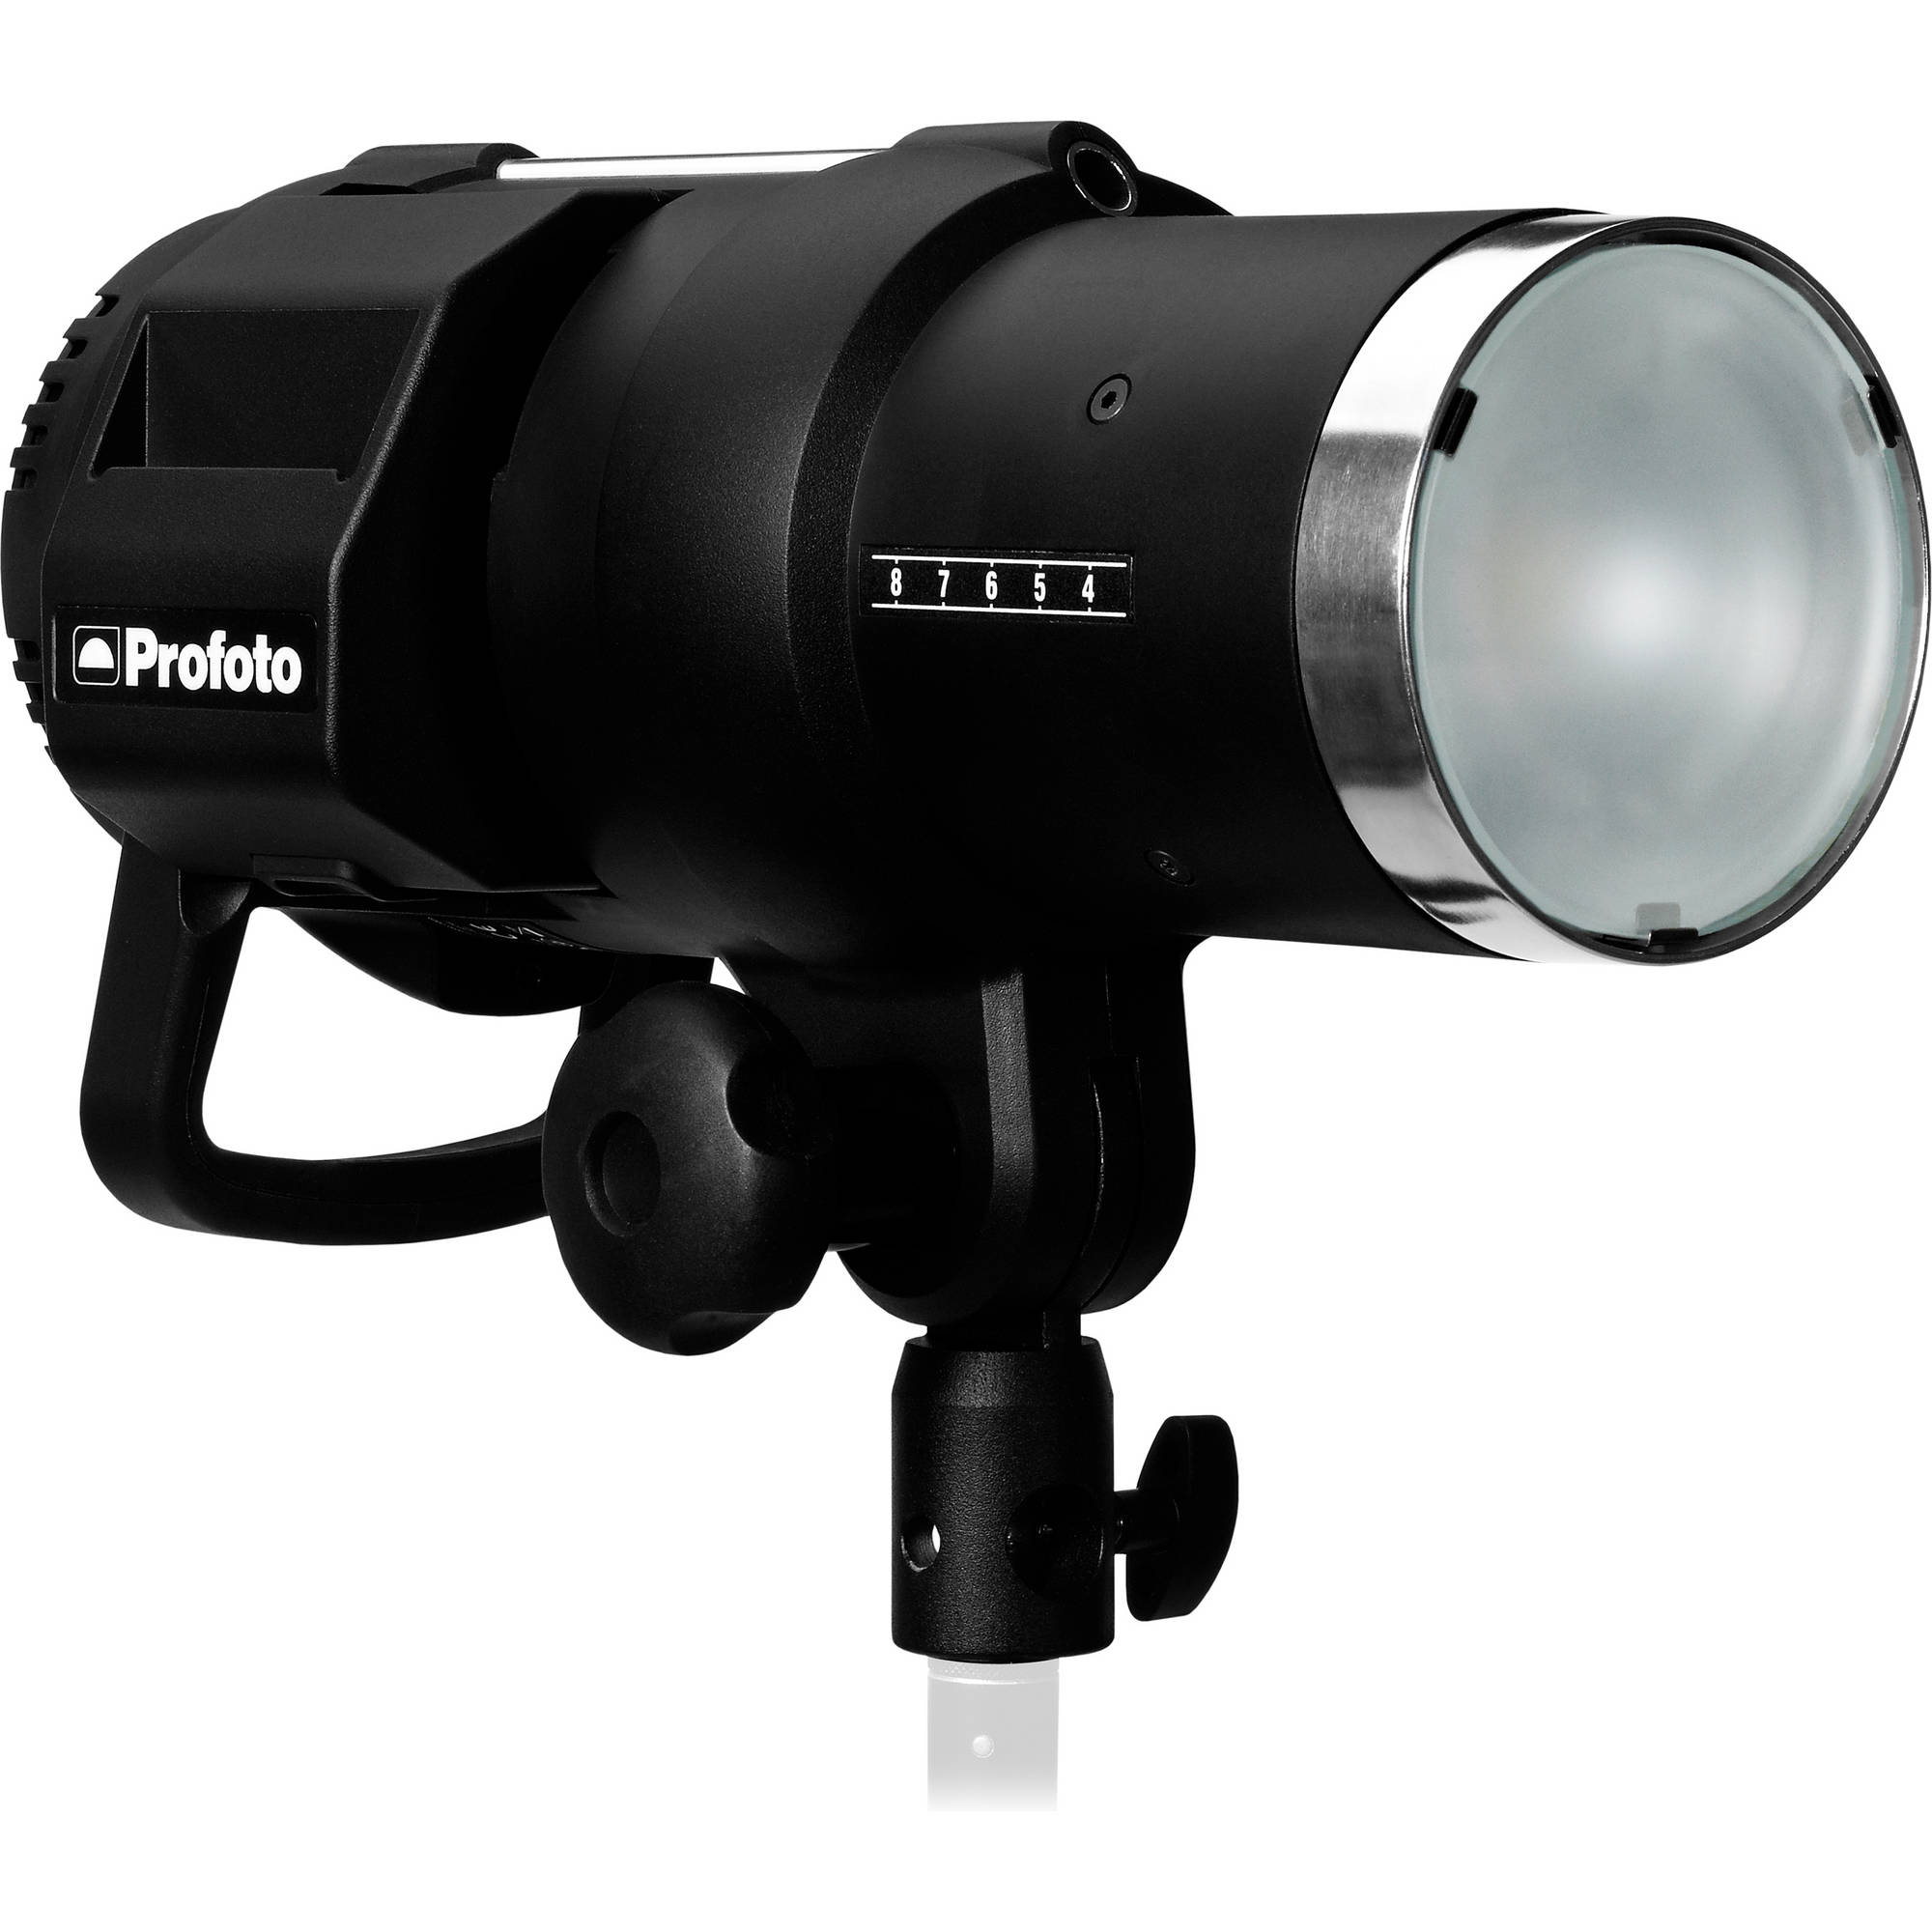 Profoto Adds High Speed Sync to B1 Strobes